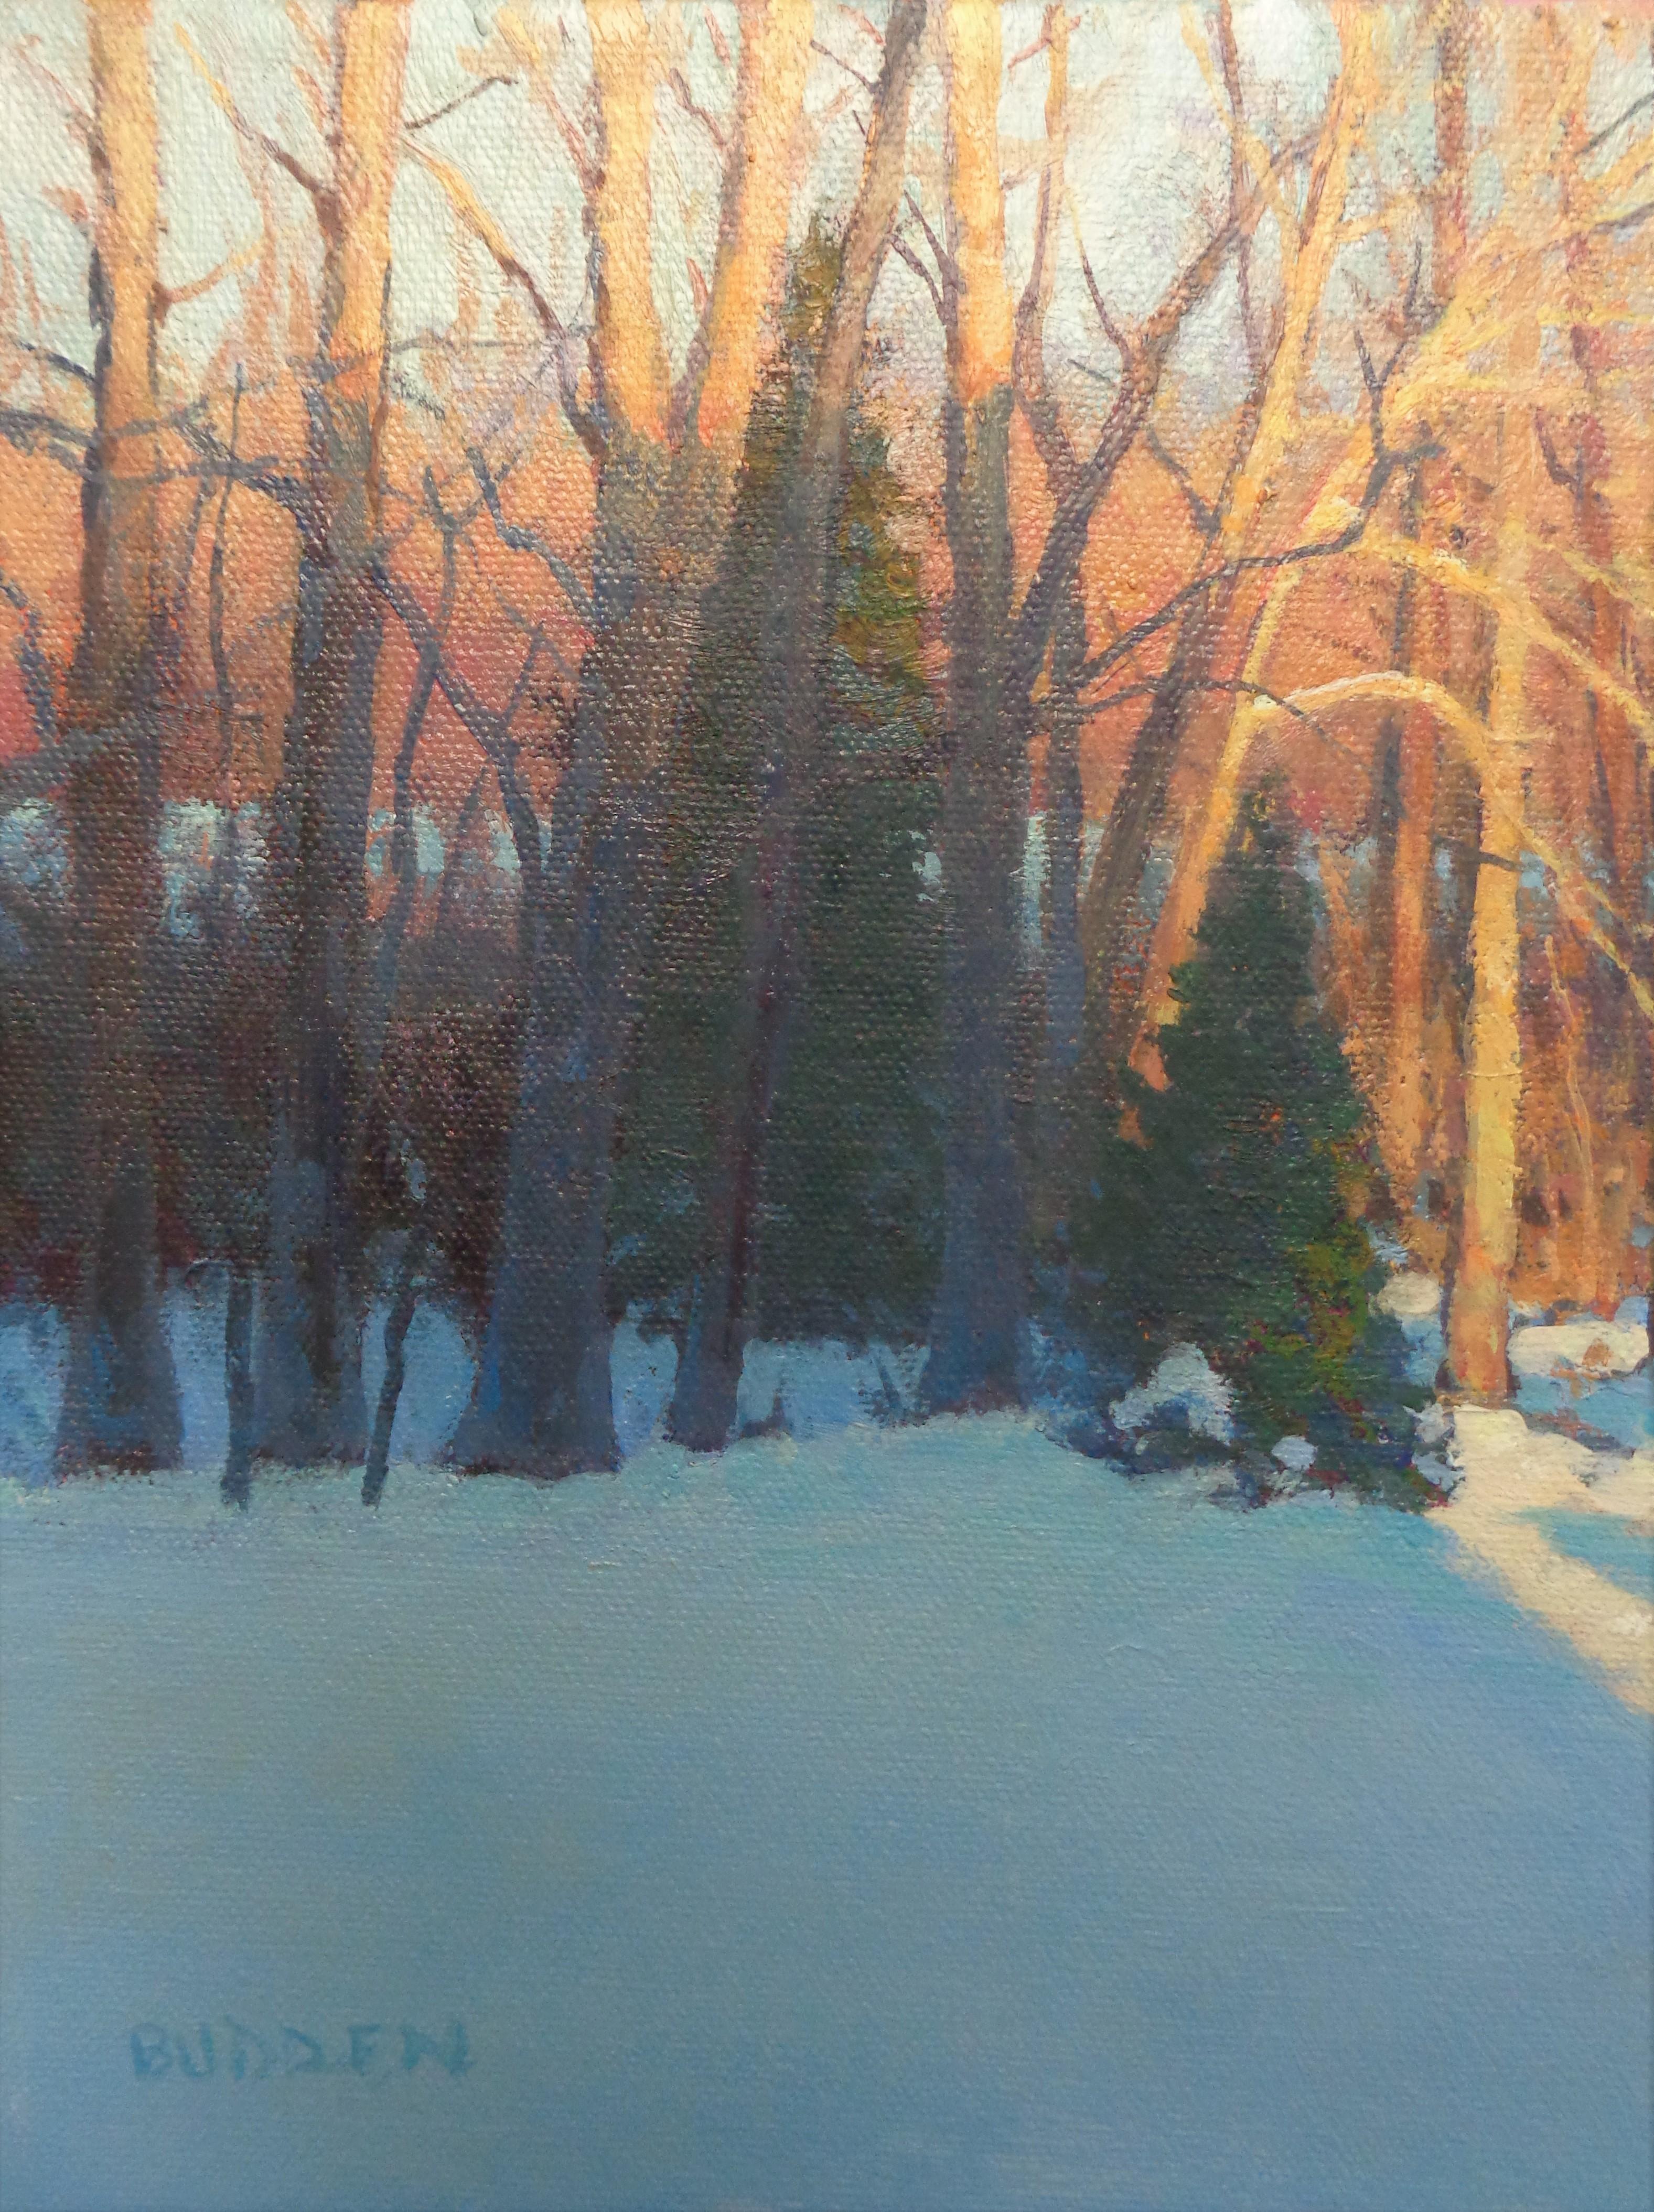   Winter Landscape Oil Painting by Michael Budden Sunlight & Shadow Winter Trees For Sale 2